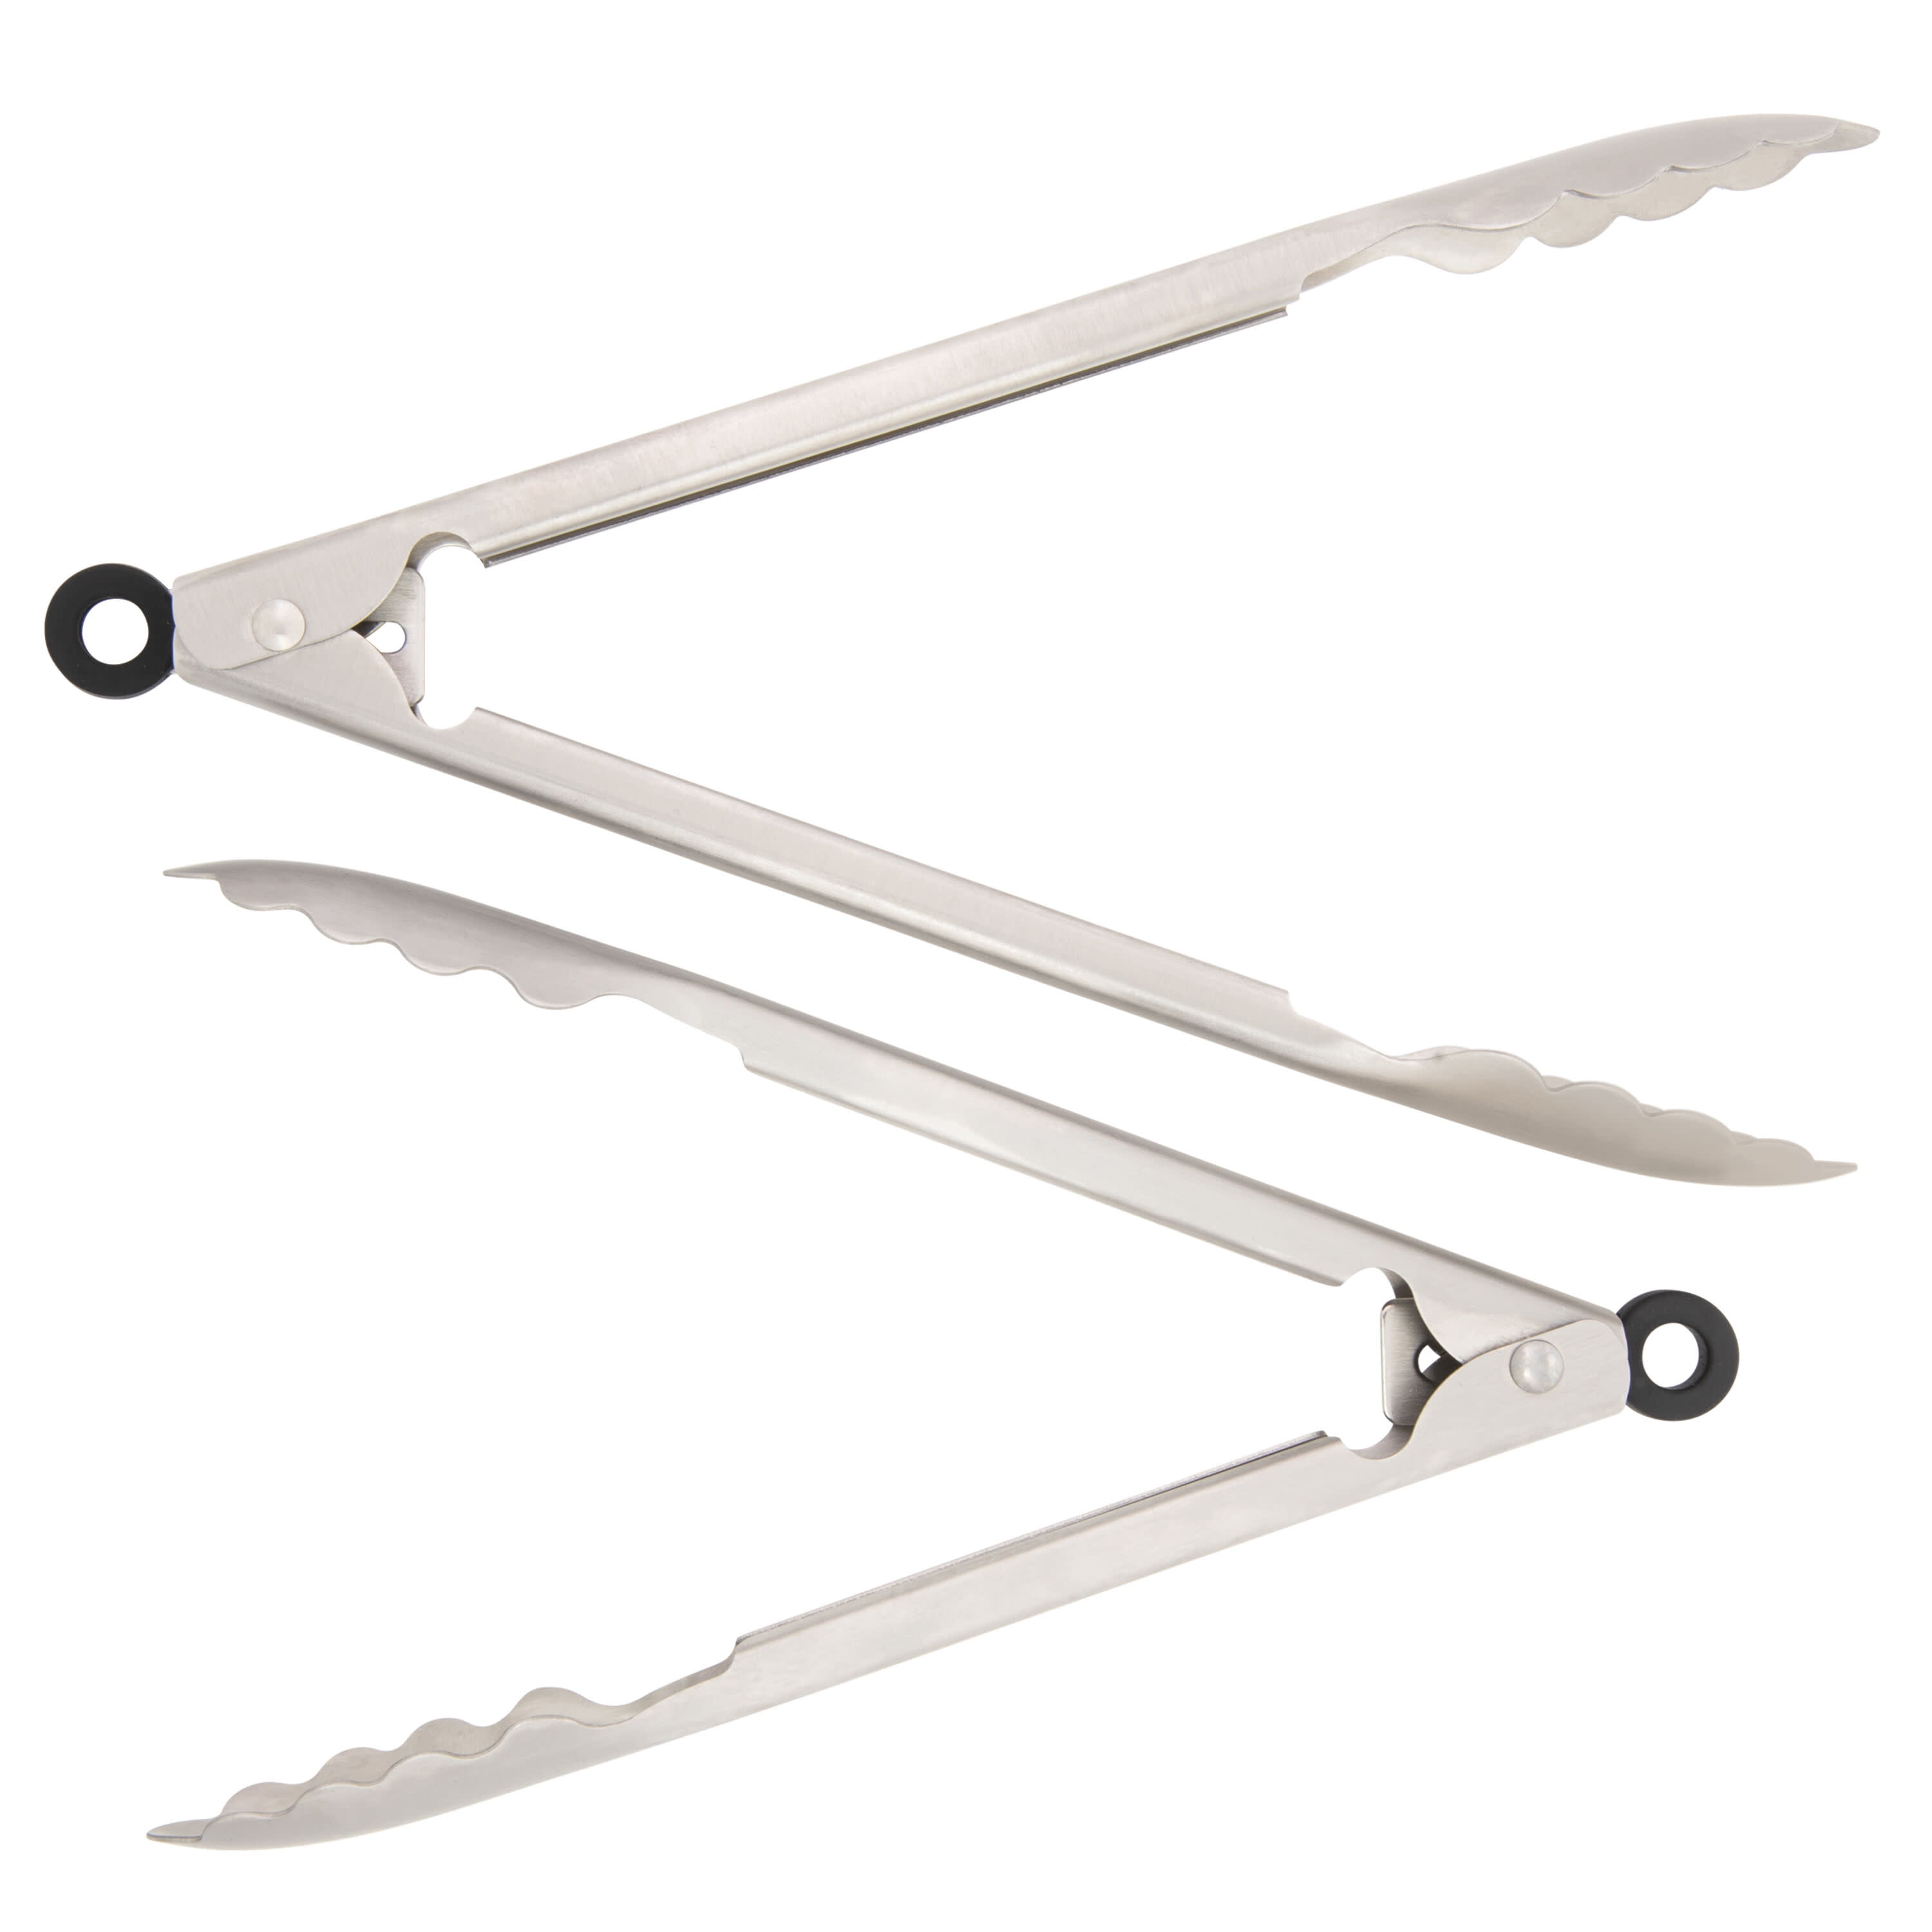 Dropship Set Of 2 Bread Tongs Serving Tongs Stainless Steel For